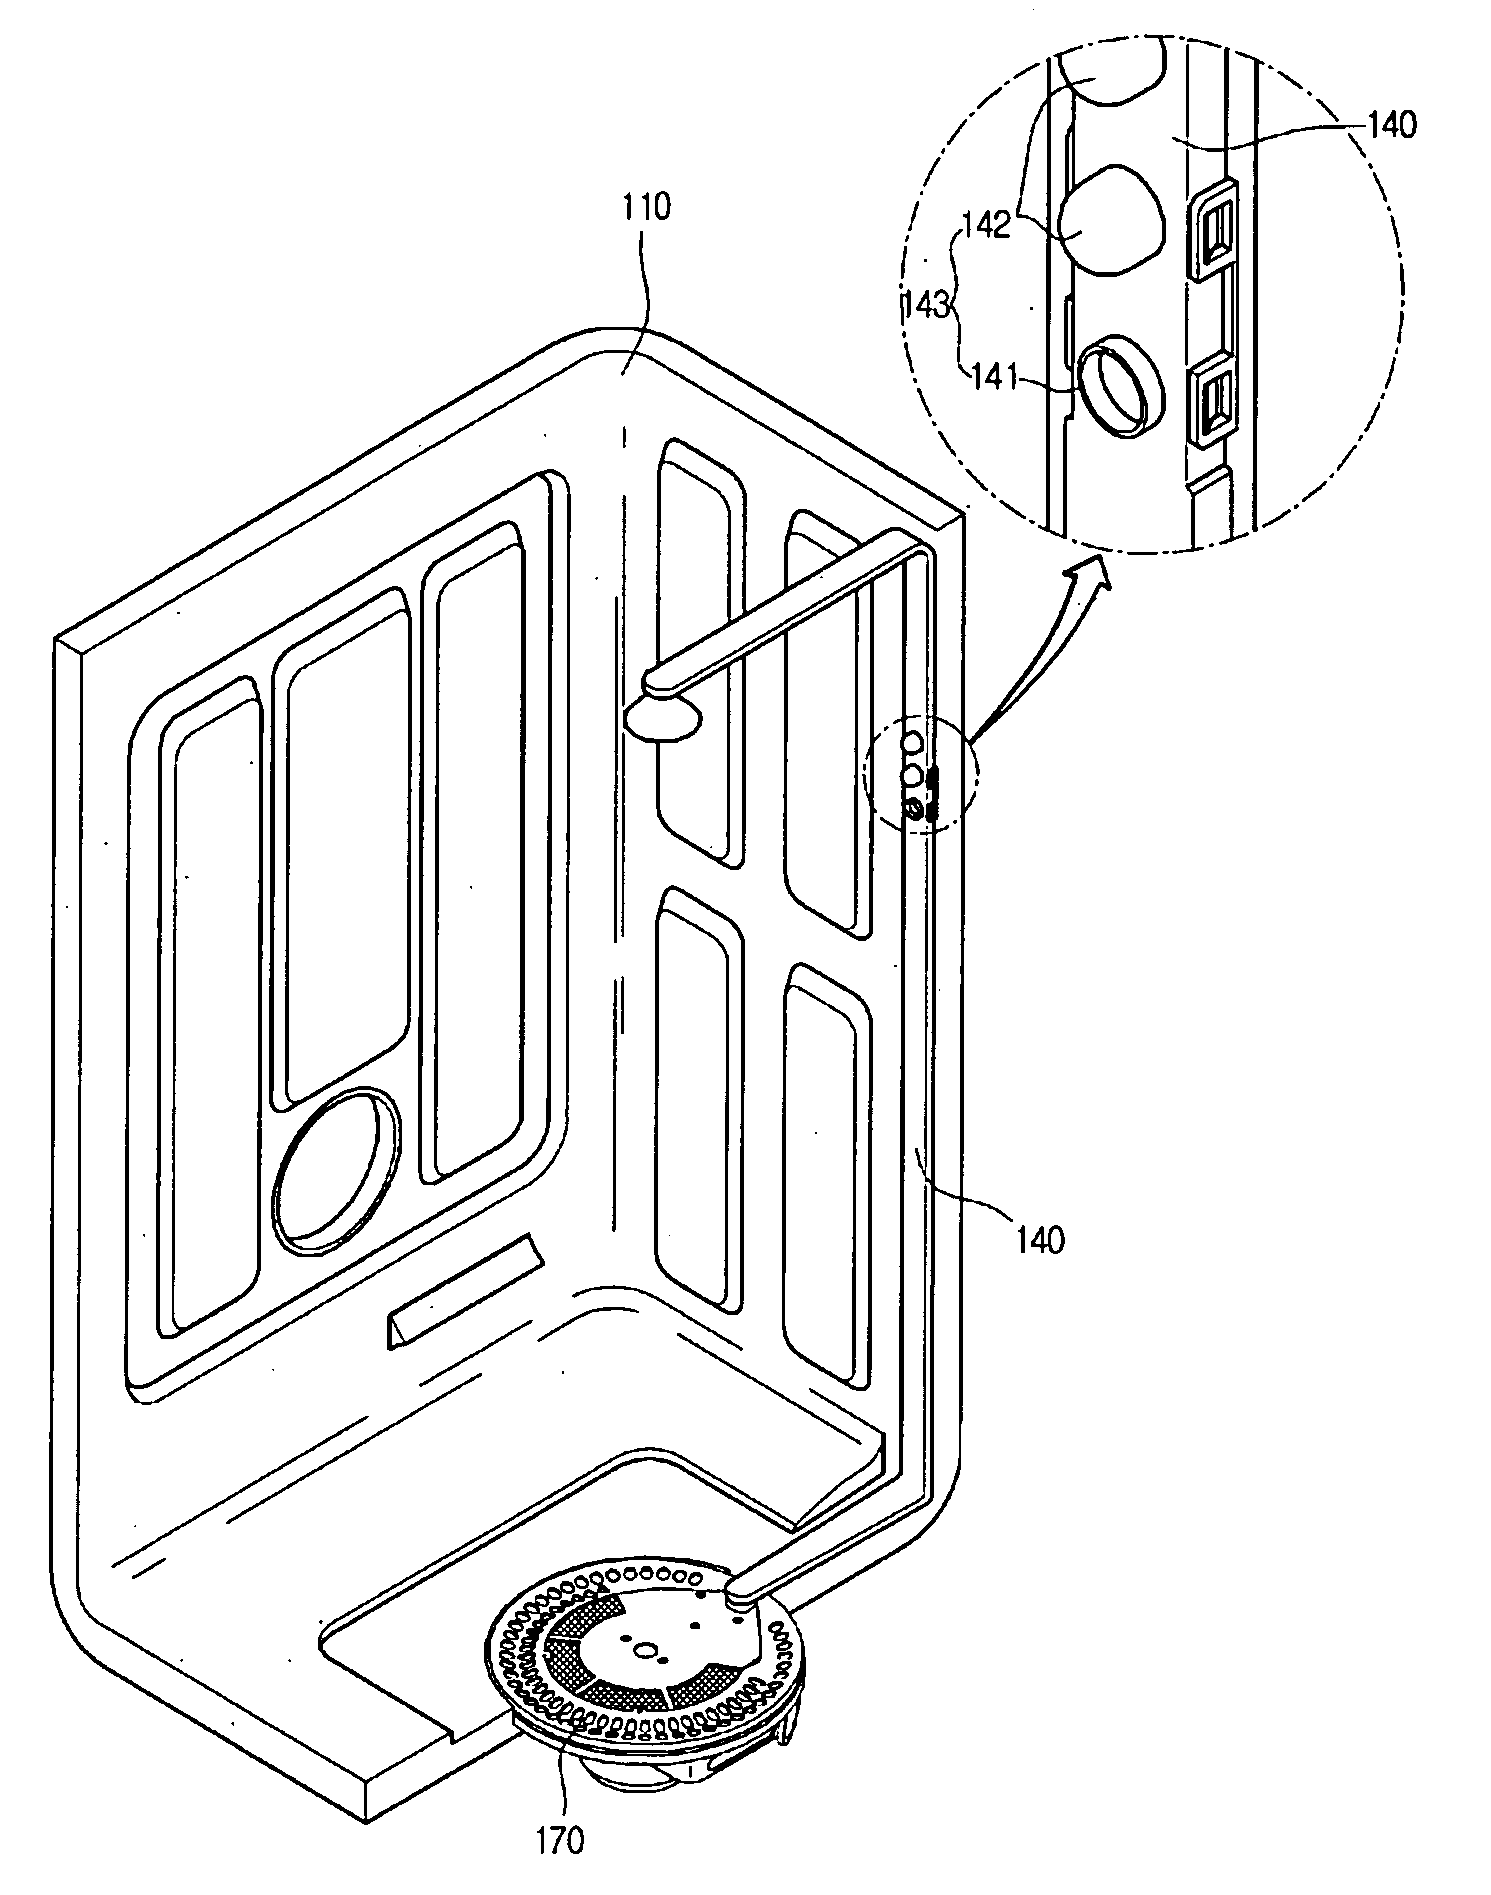 Nozzle Structure of Dish Washer